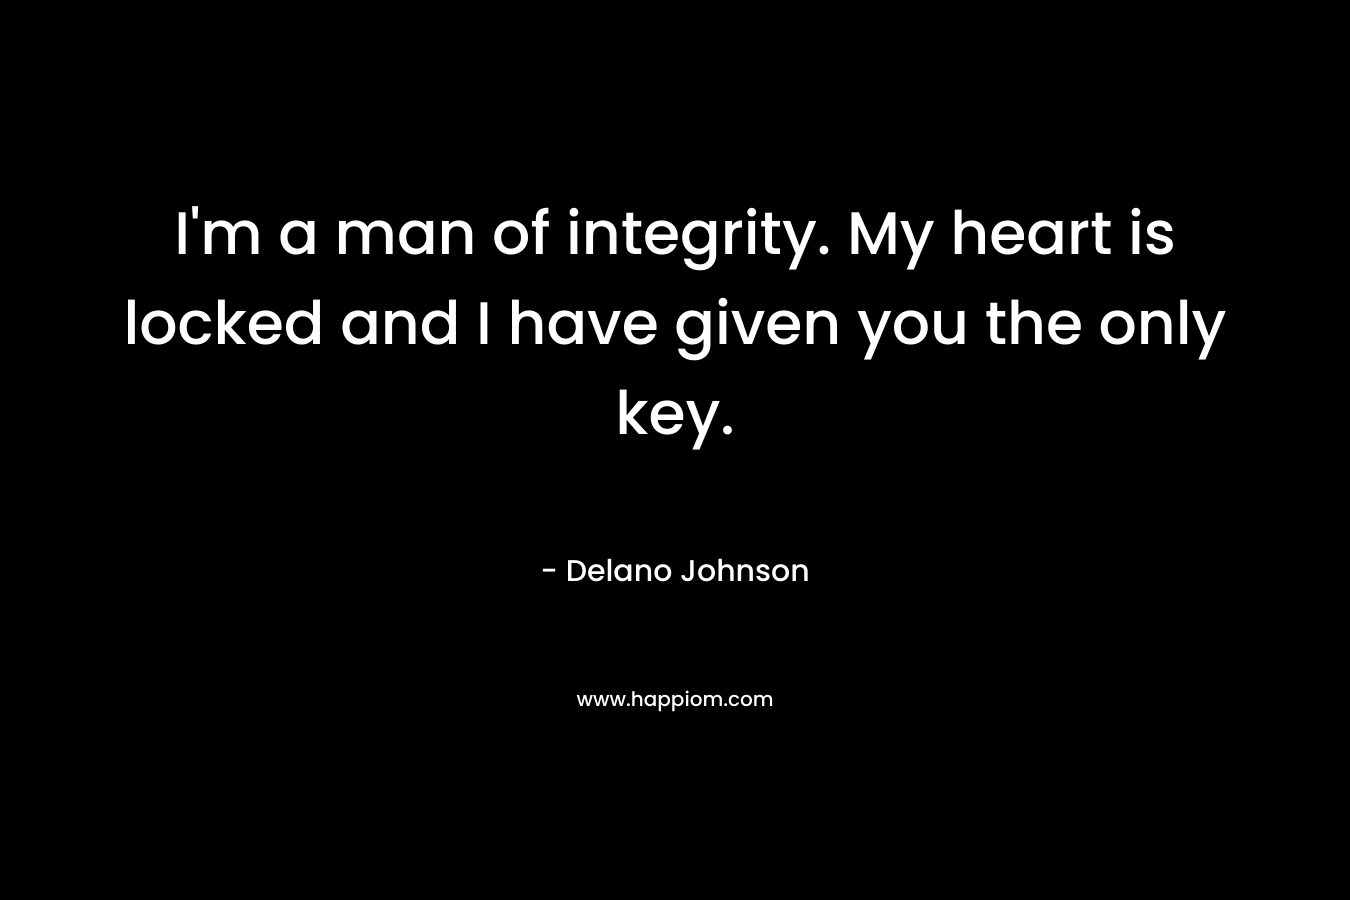 I'm a man of integrity. My heart is locked and I have given you the only key.